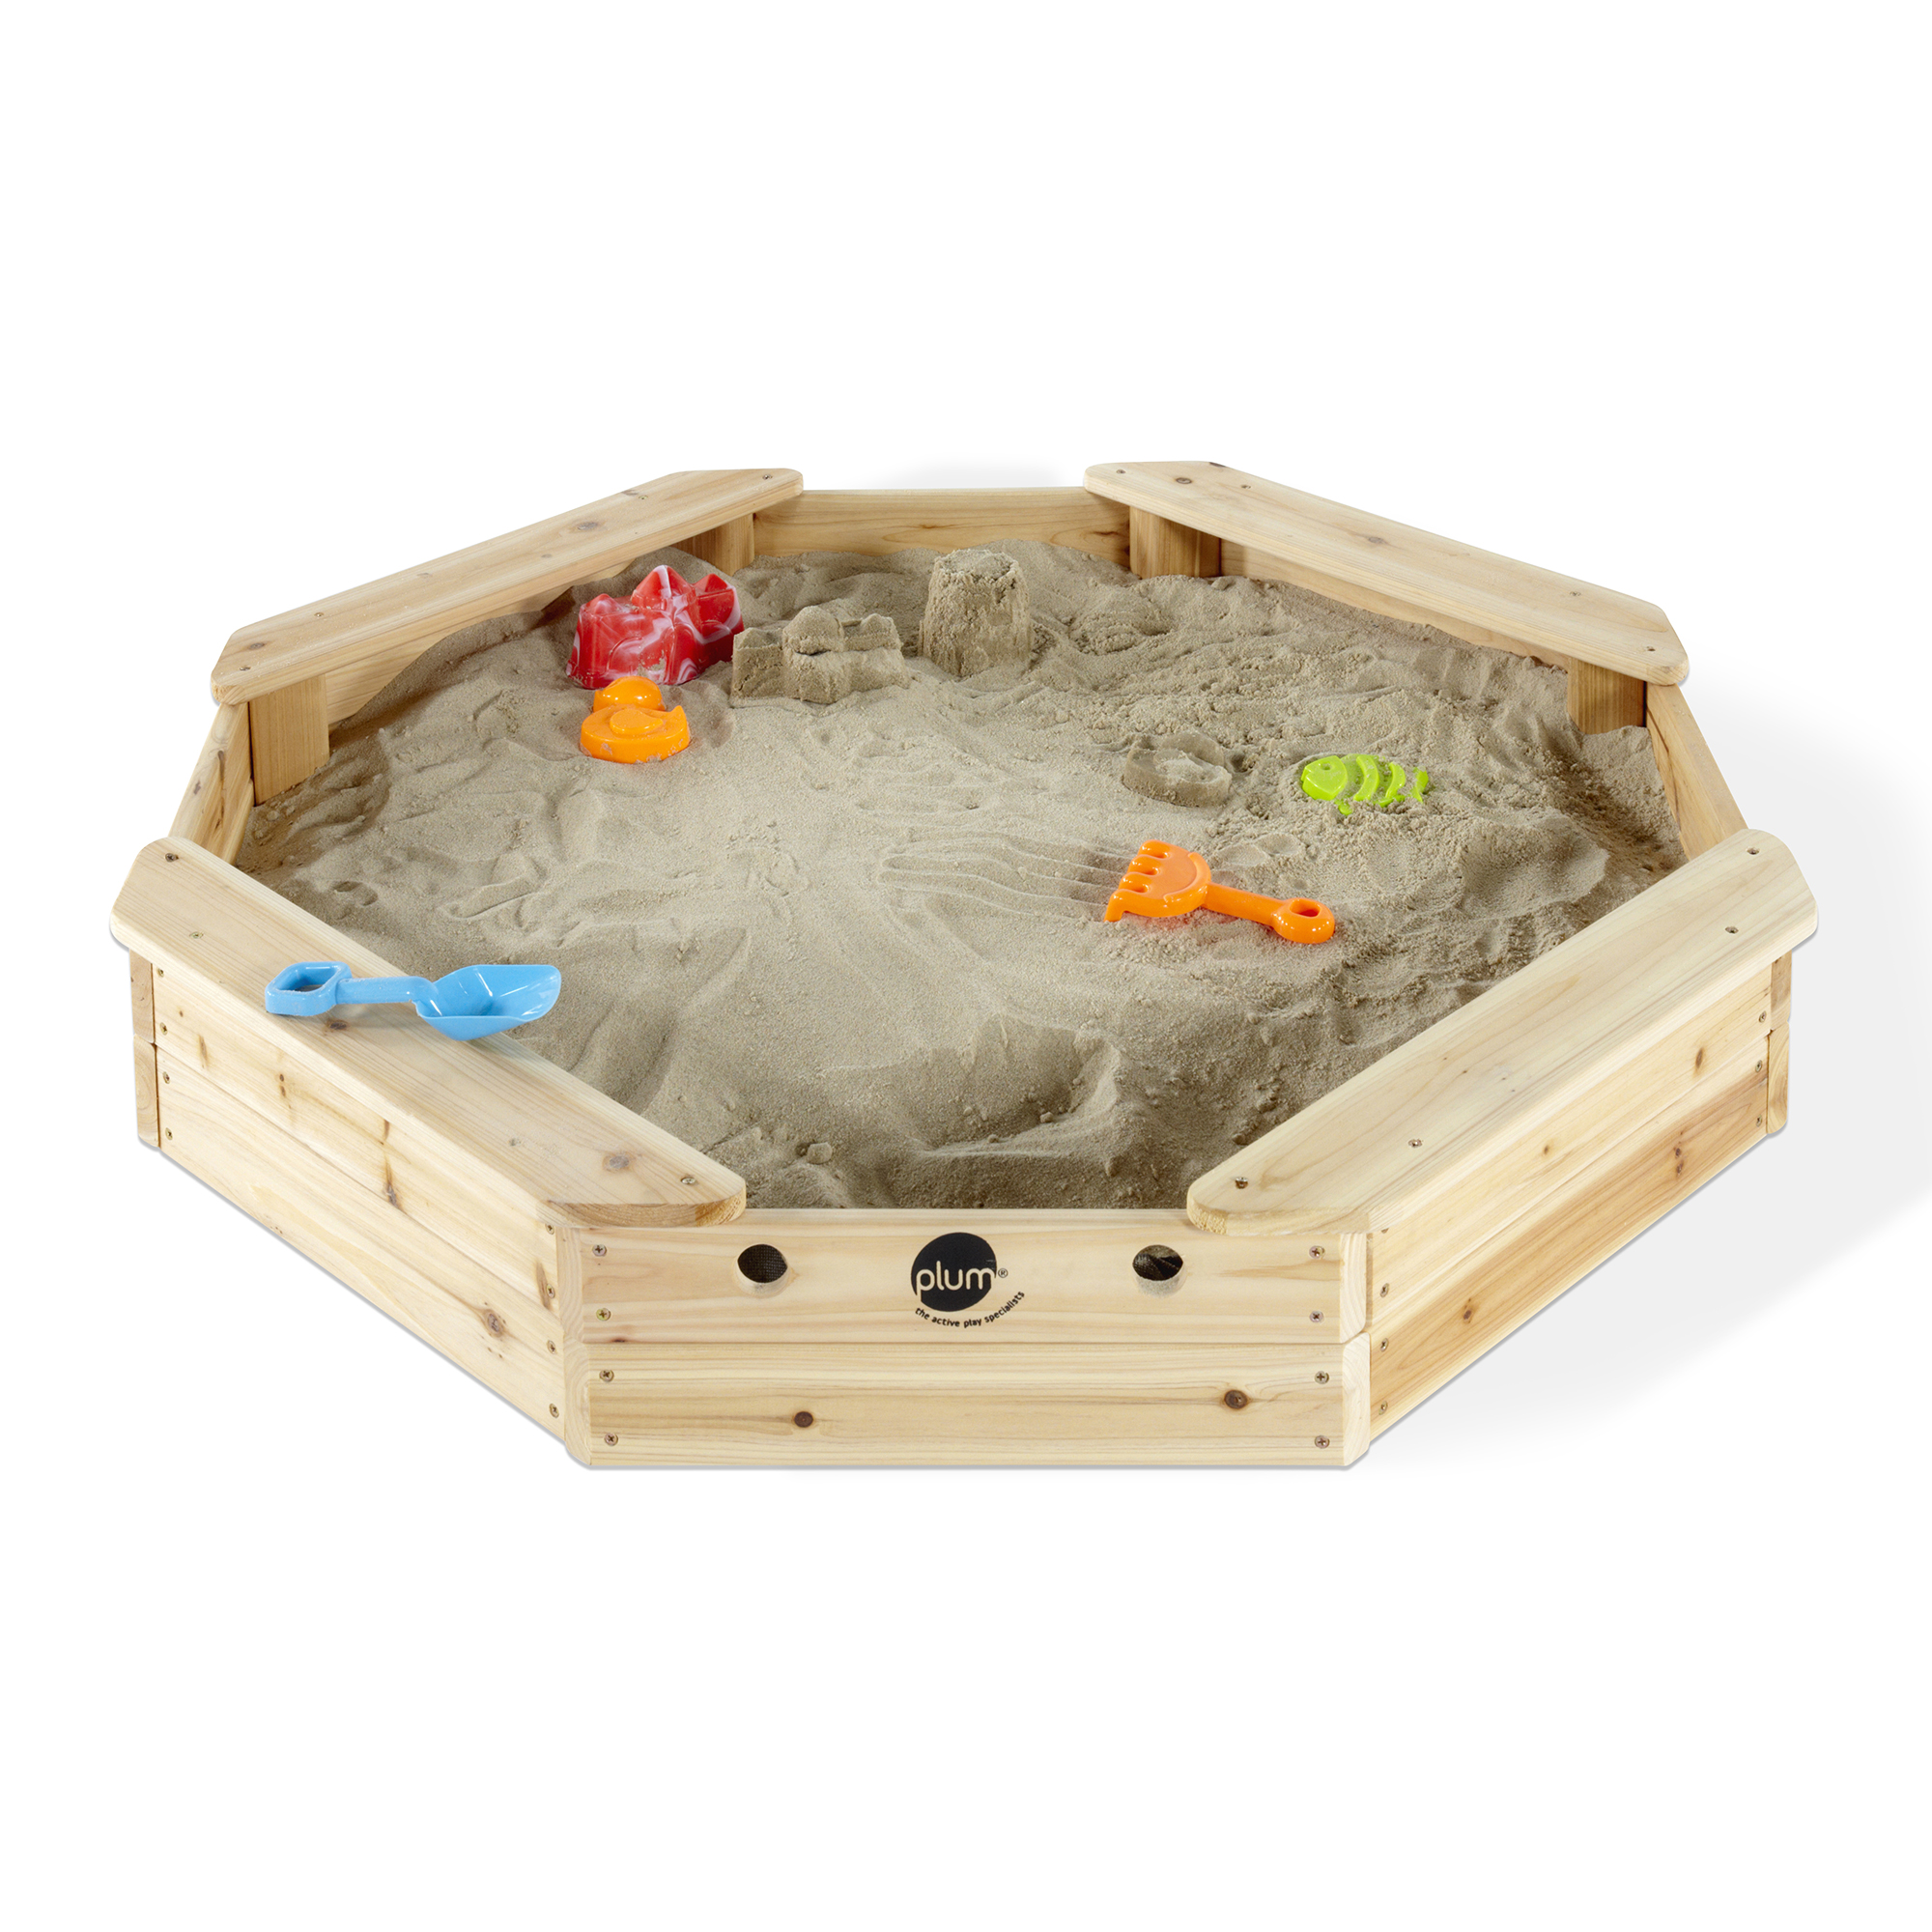 Plum Play Treasure Beach 46" Wooden Sandbox with protective cover and groundsheet - image 1 of 2